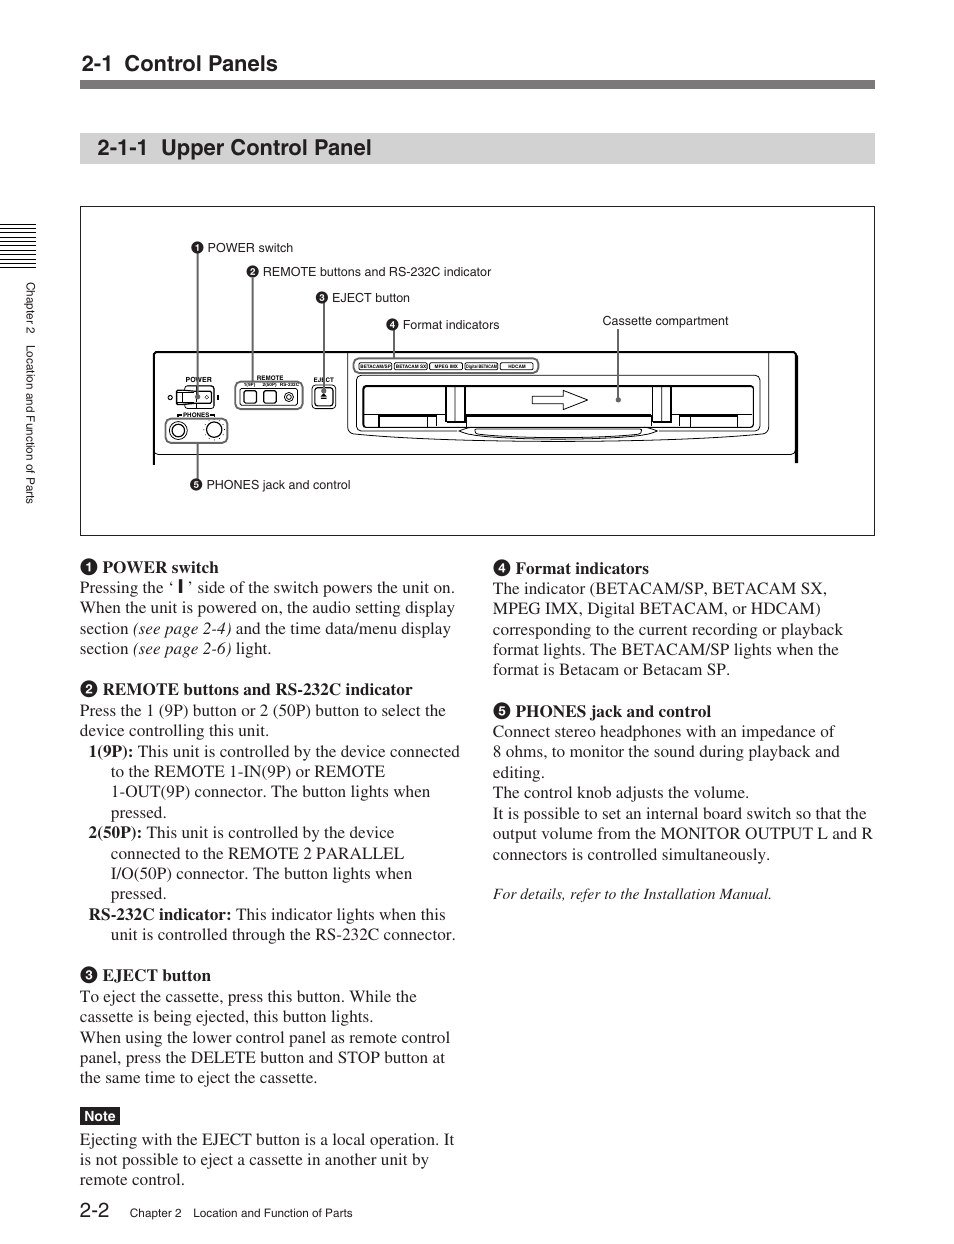 1-1 upper control panel, 1 control panels | Sony HDW-M2100 User Manual | Page 10 / 115